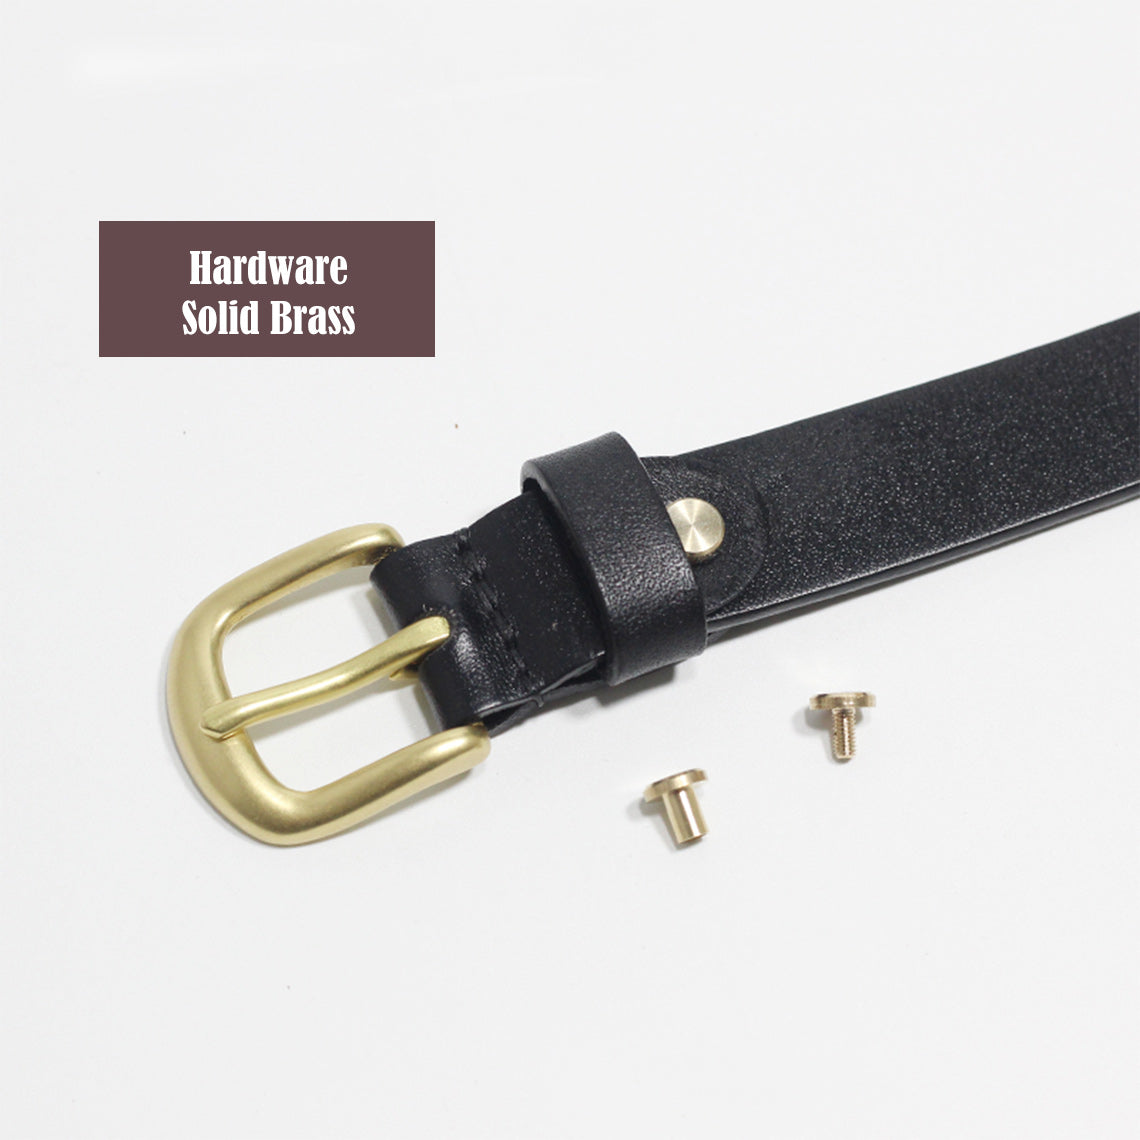 Leather Belt for Women | Genuine Leather Belt with Solid Brass Hardware - POPSEWING™